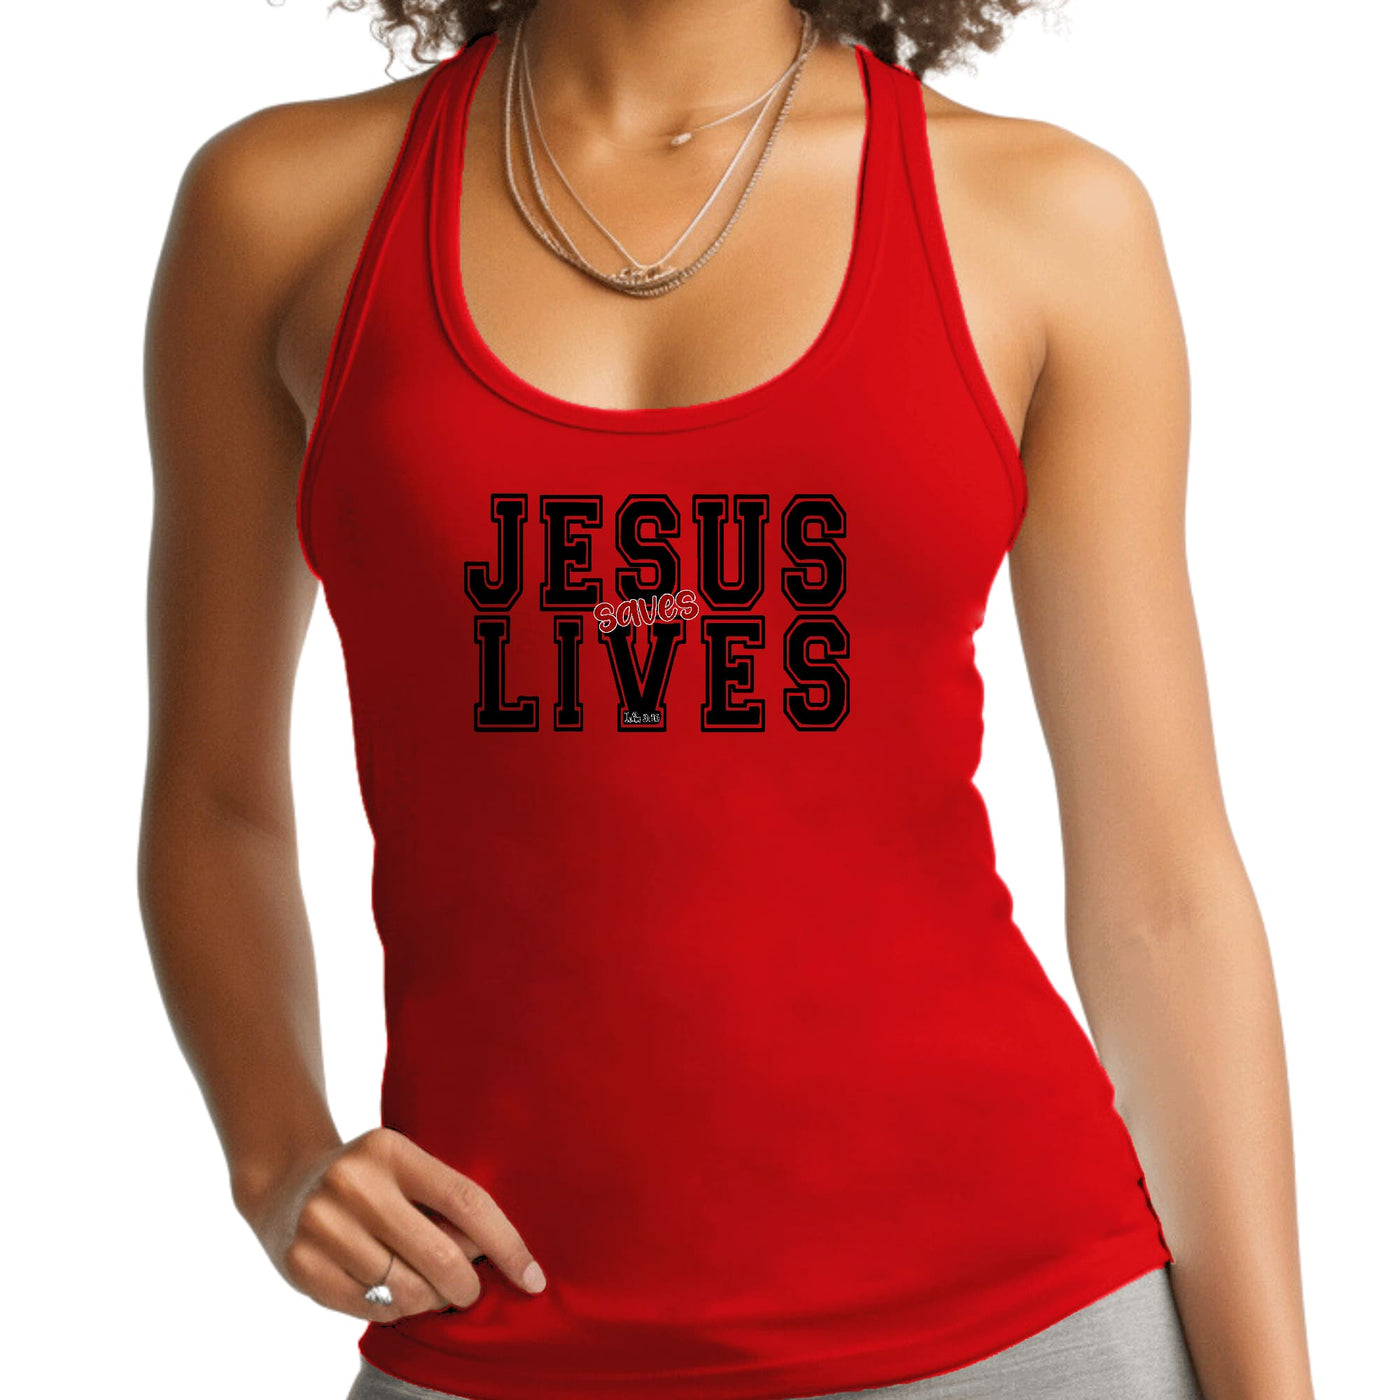 Womens Fitness Tank Top Graphic T-shirt Jesus Saves Lives Black Red - Womens